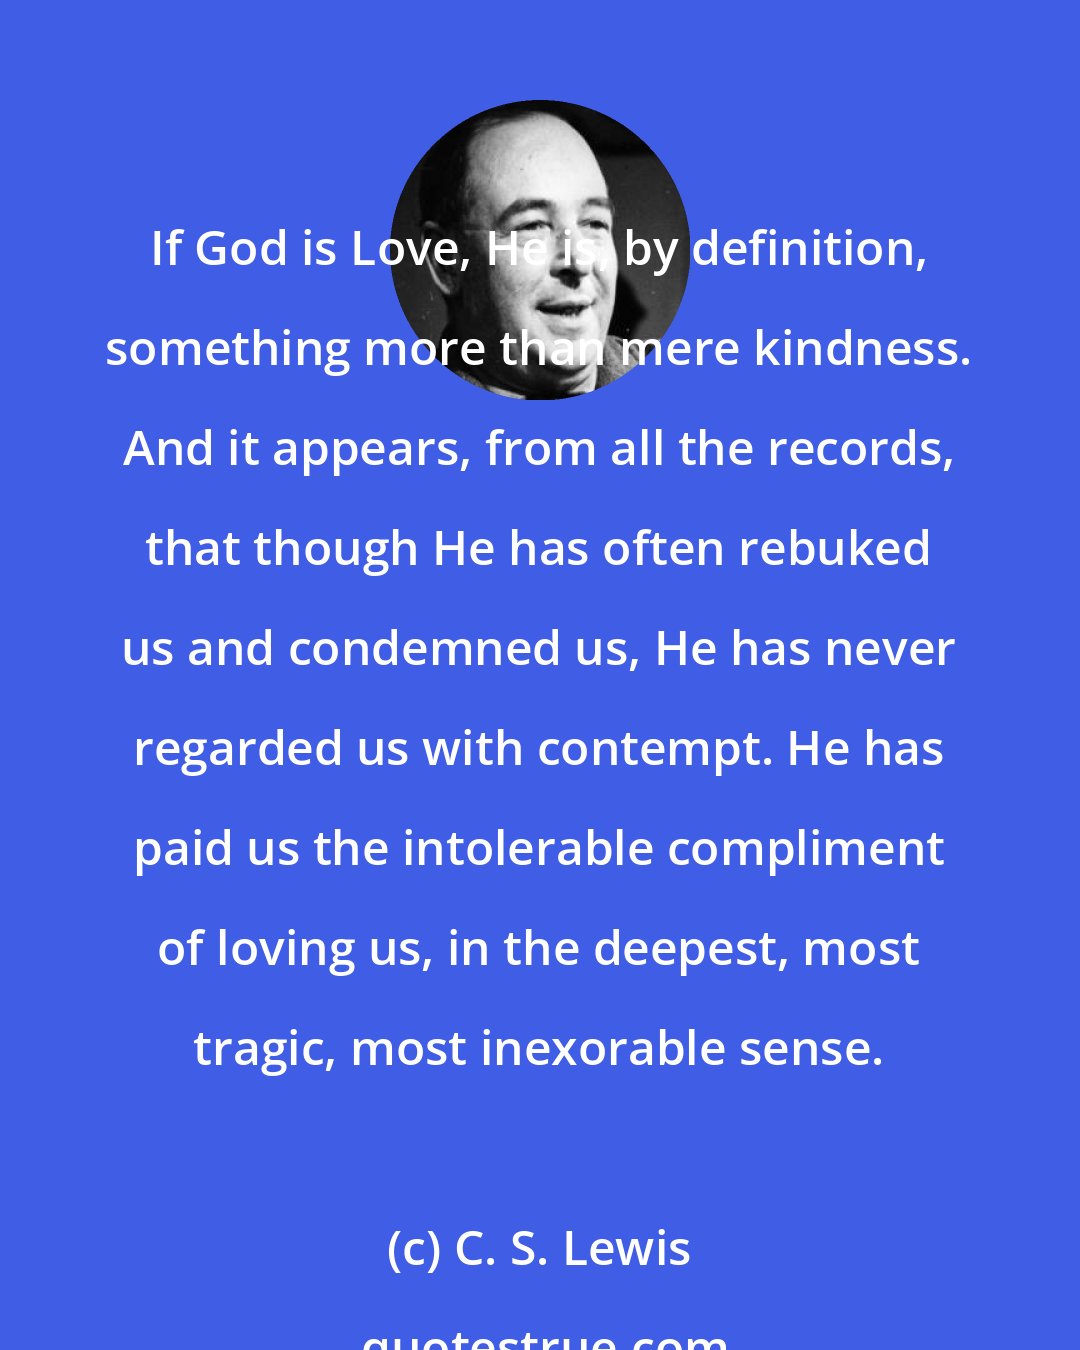 C. S. Lewis: If God is Love, He is, by definition, something more than mere kindness. And it appears, from all the records, that though He has often rebuked us and condemned us, He has never regarded us with contempt. He has paid us the intolerable compliment of loving us, in the deepest, most tragic, most inexorable sense.